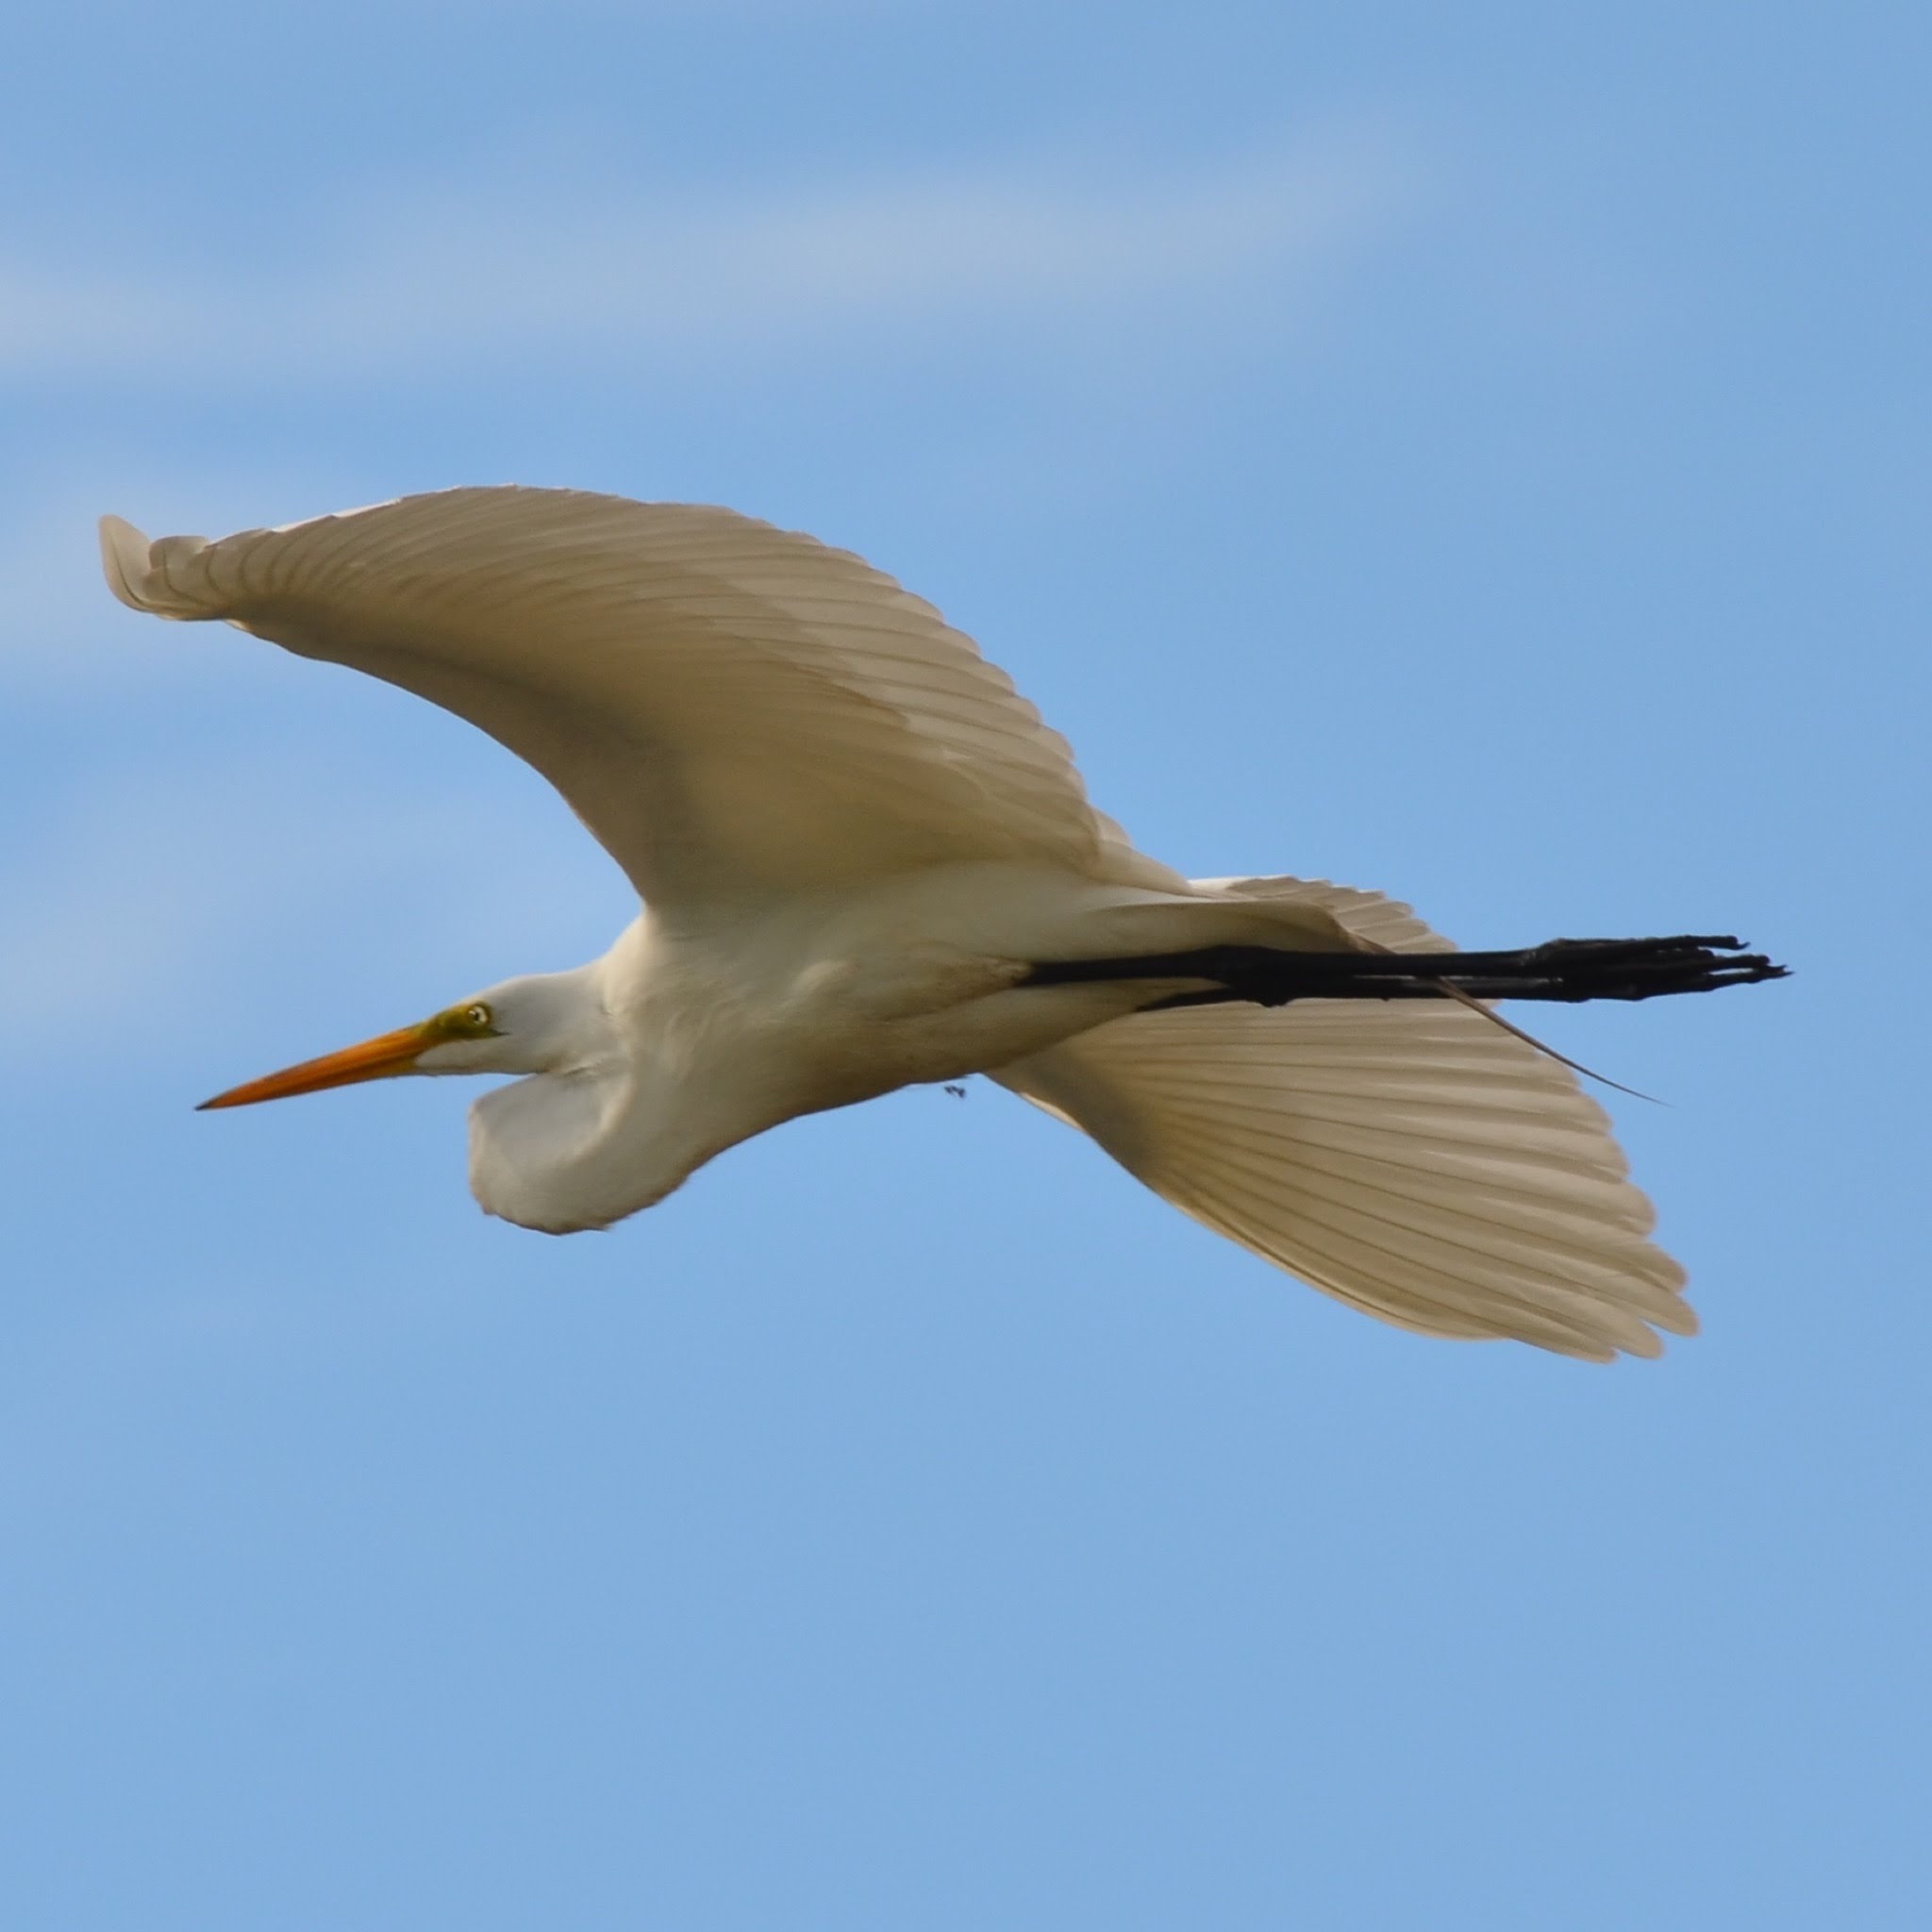 Great Egret soaring over our house.